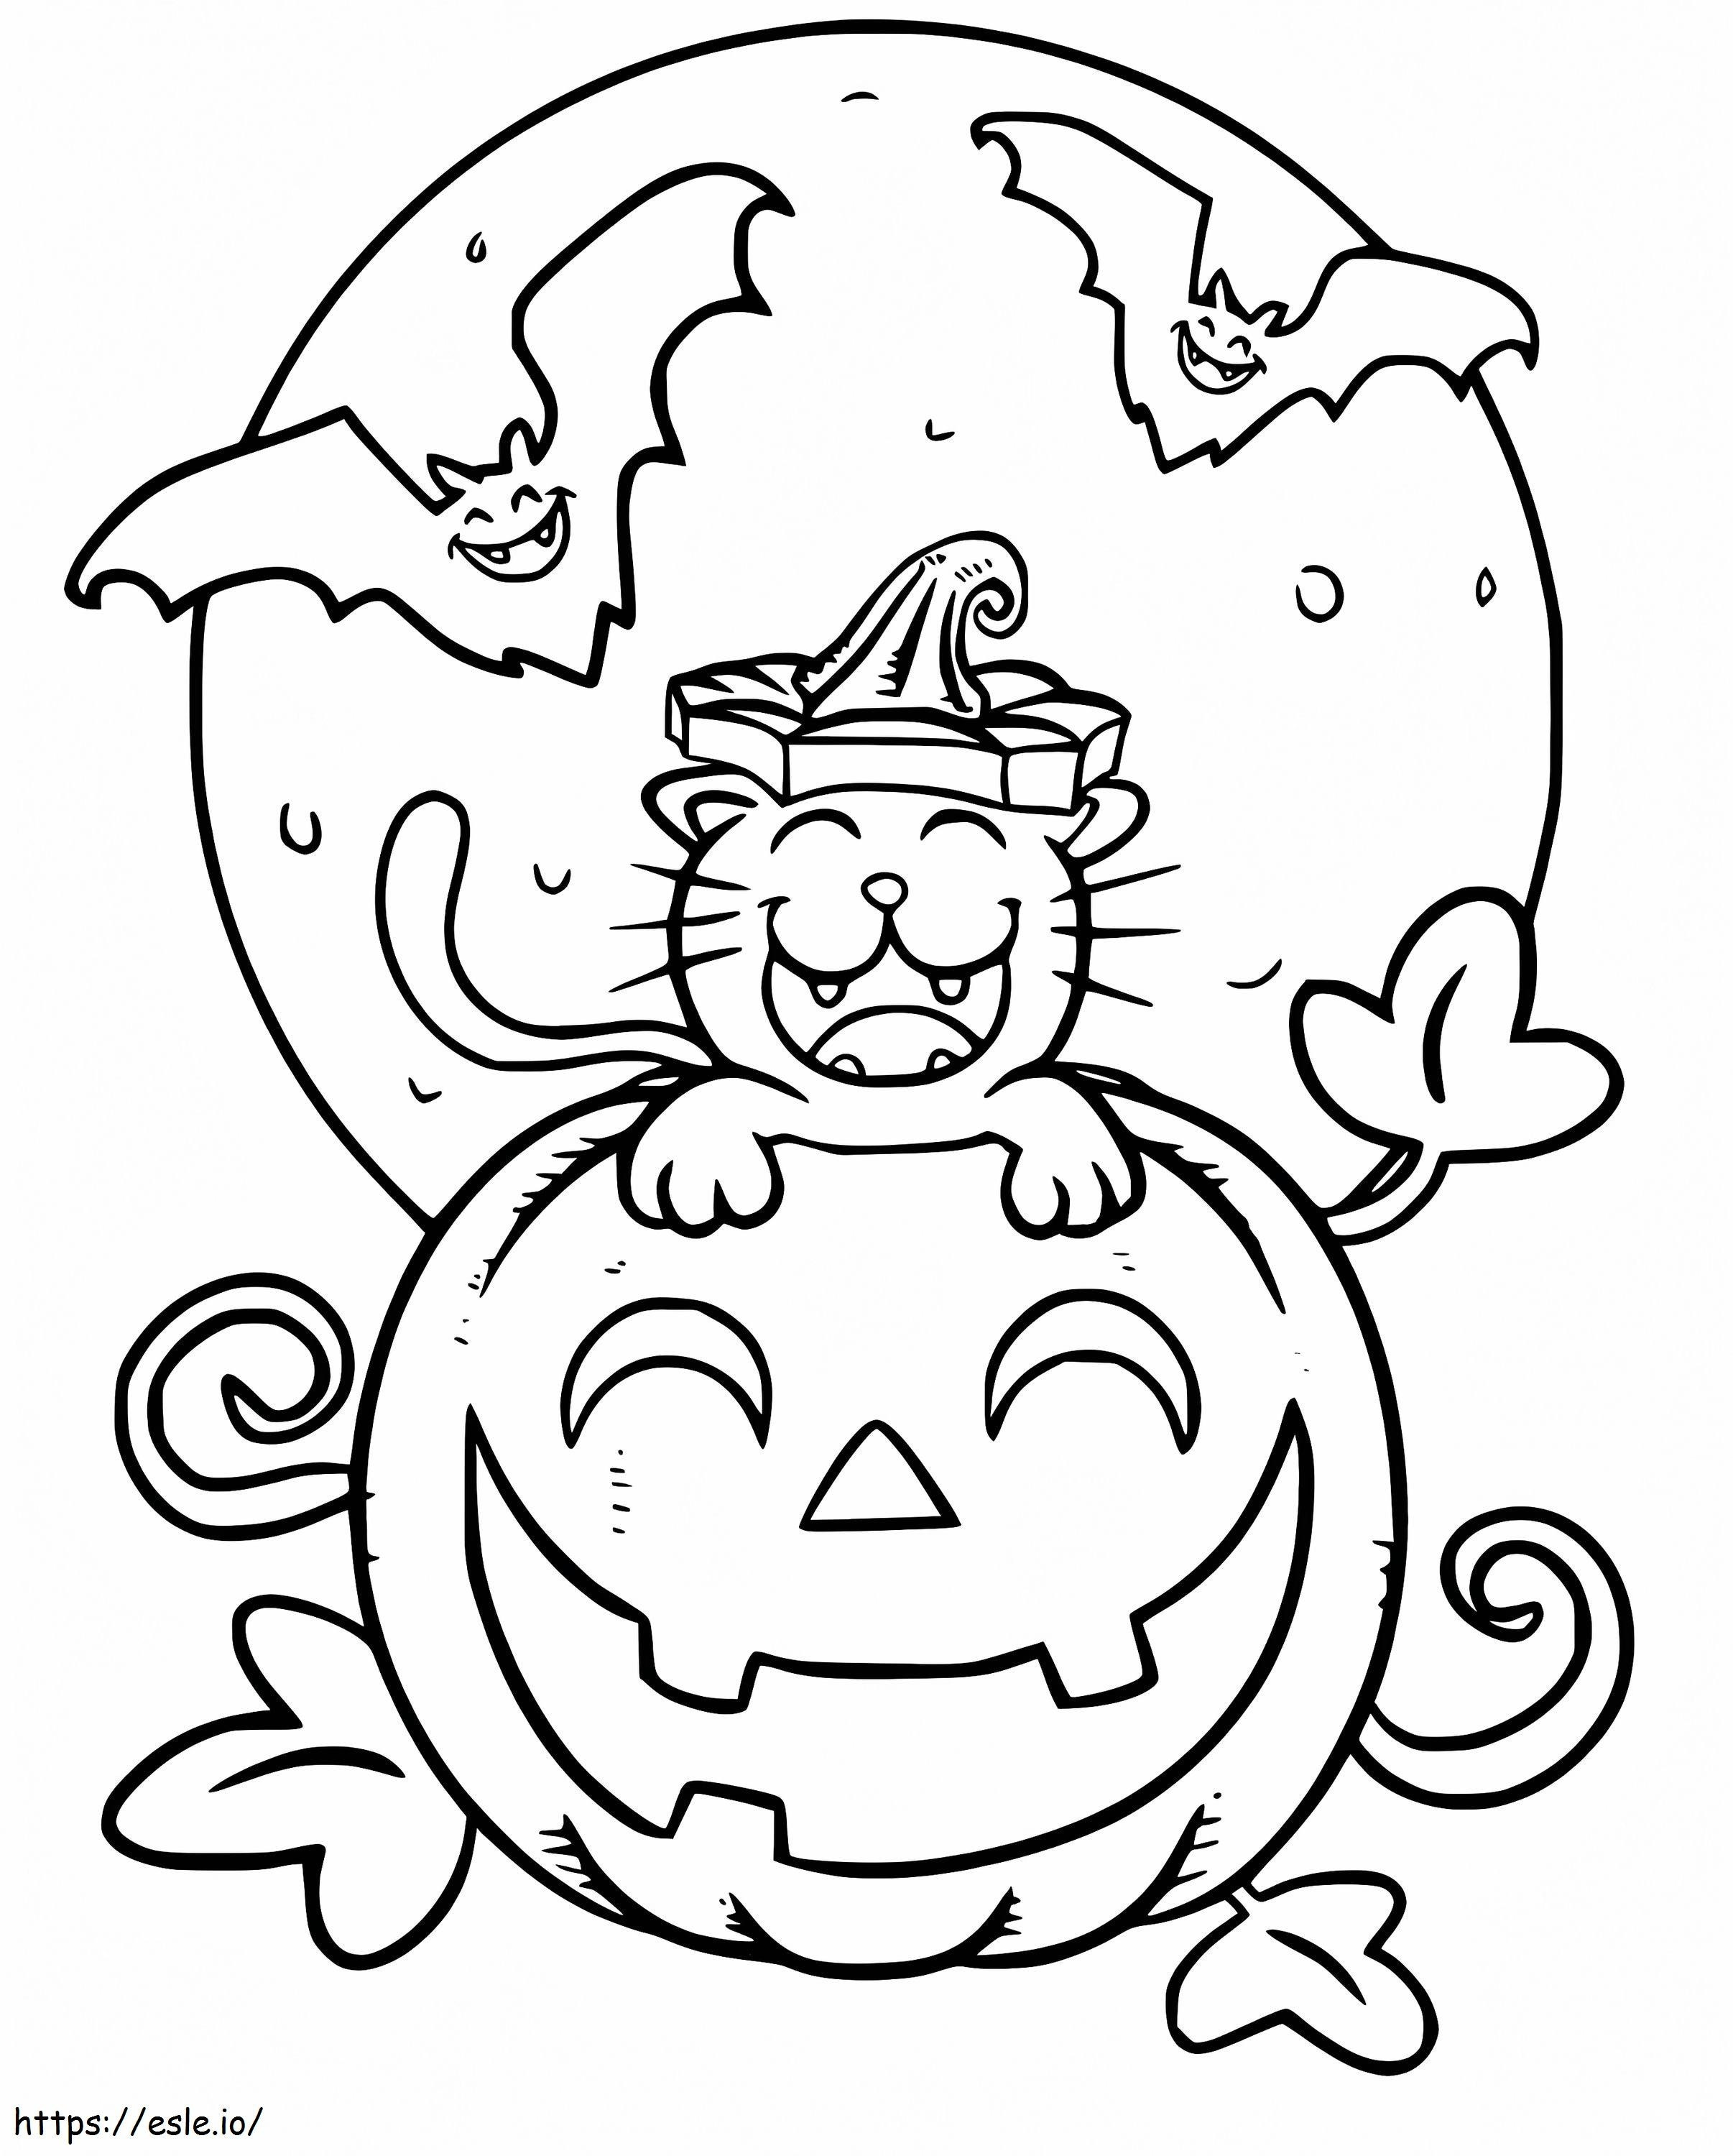 Halween Cat 8 coloring page